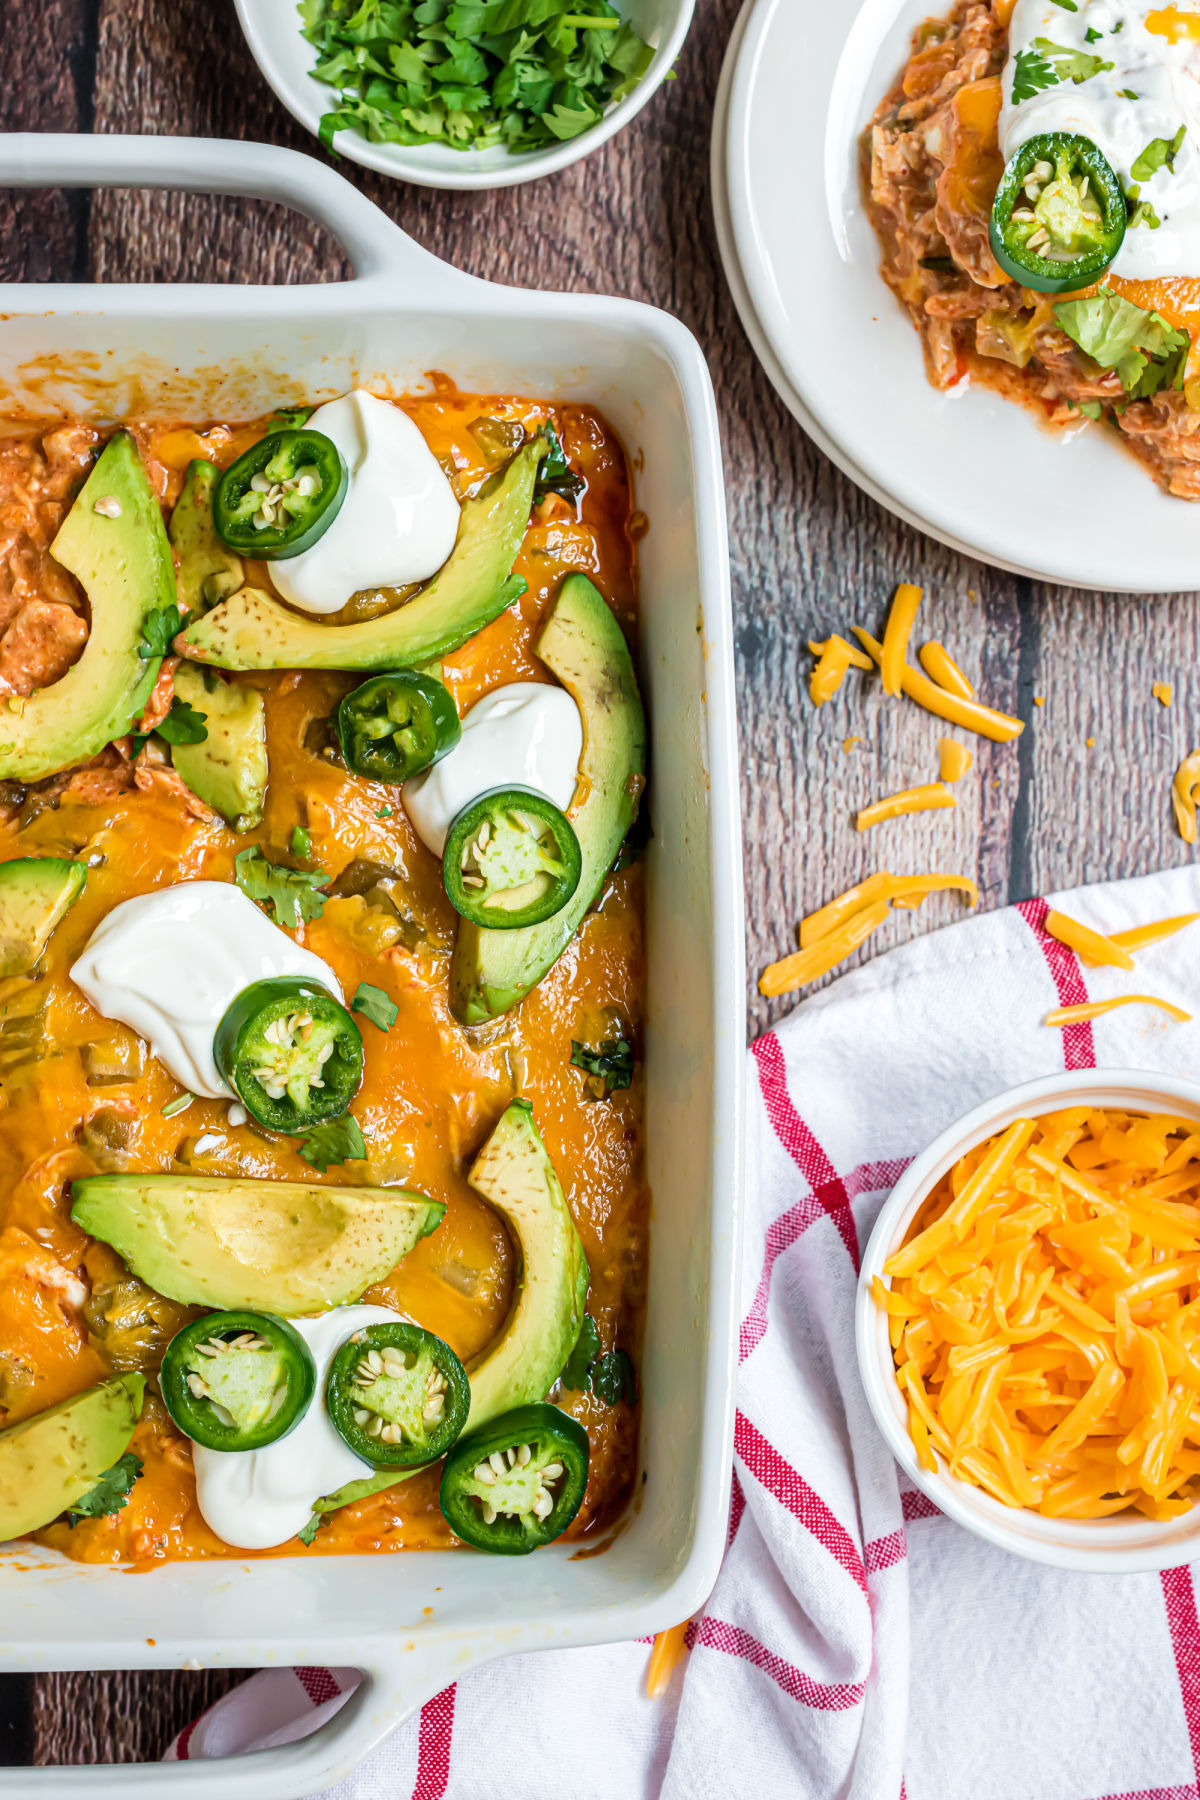 Chicken enchilada casserole in white baking dish served with avocado, cheese, sour cream, and jalapeno slices.